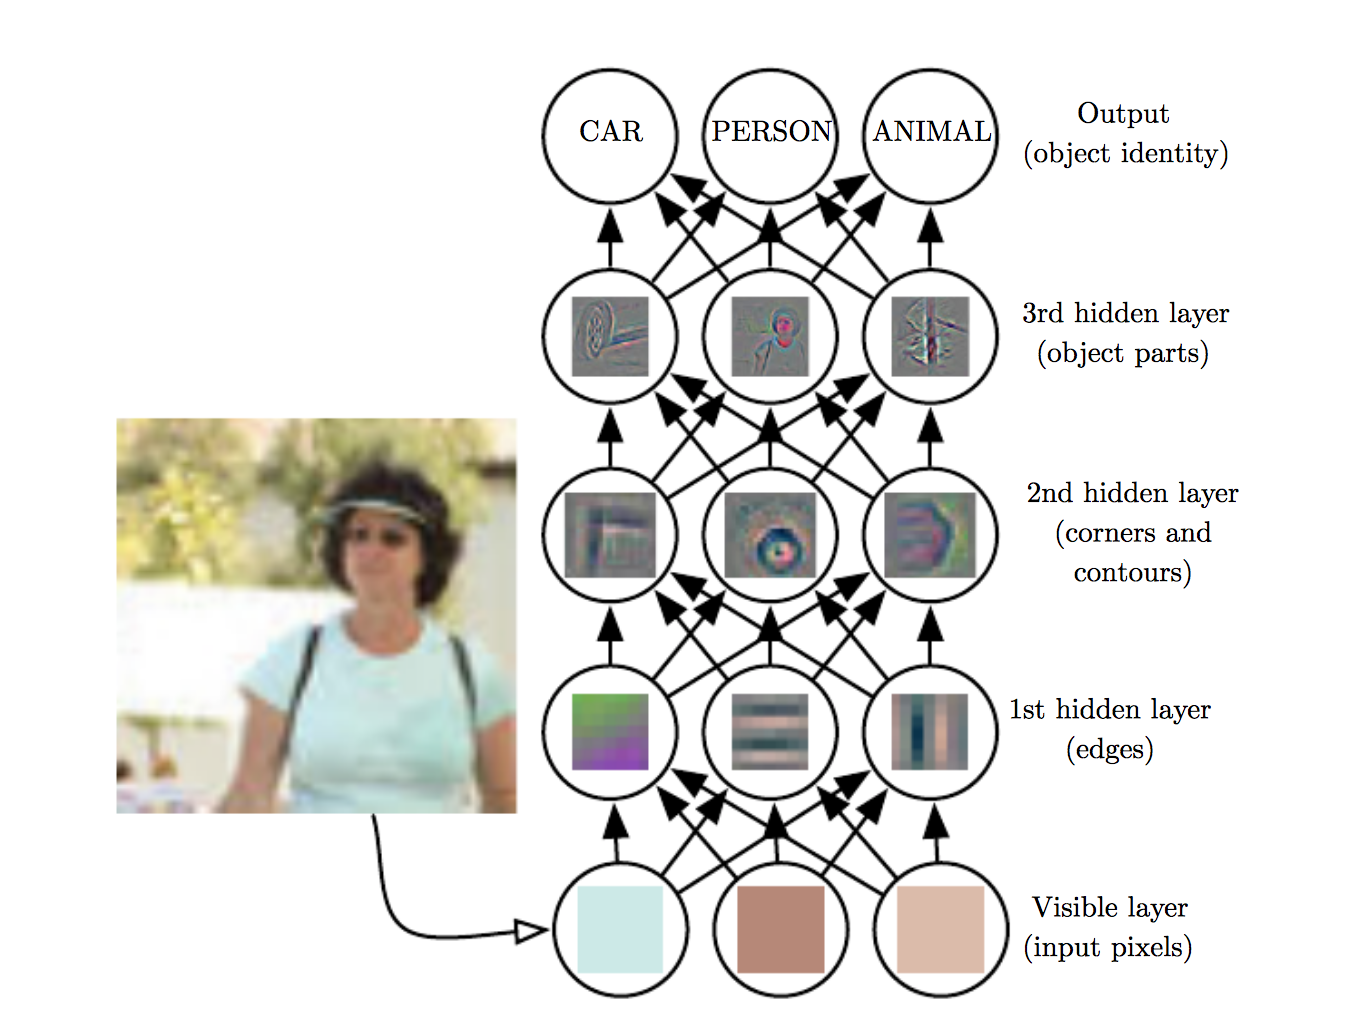 Convolutional neural networks learn hierarchical representations